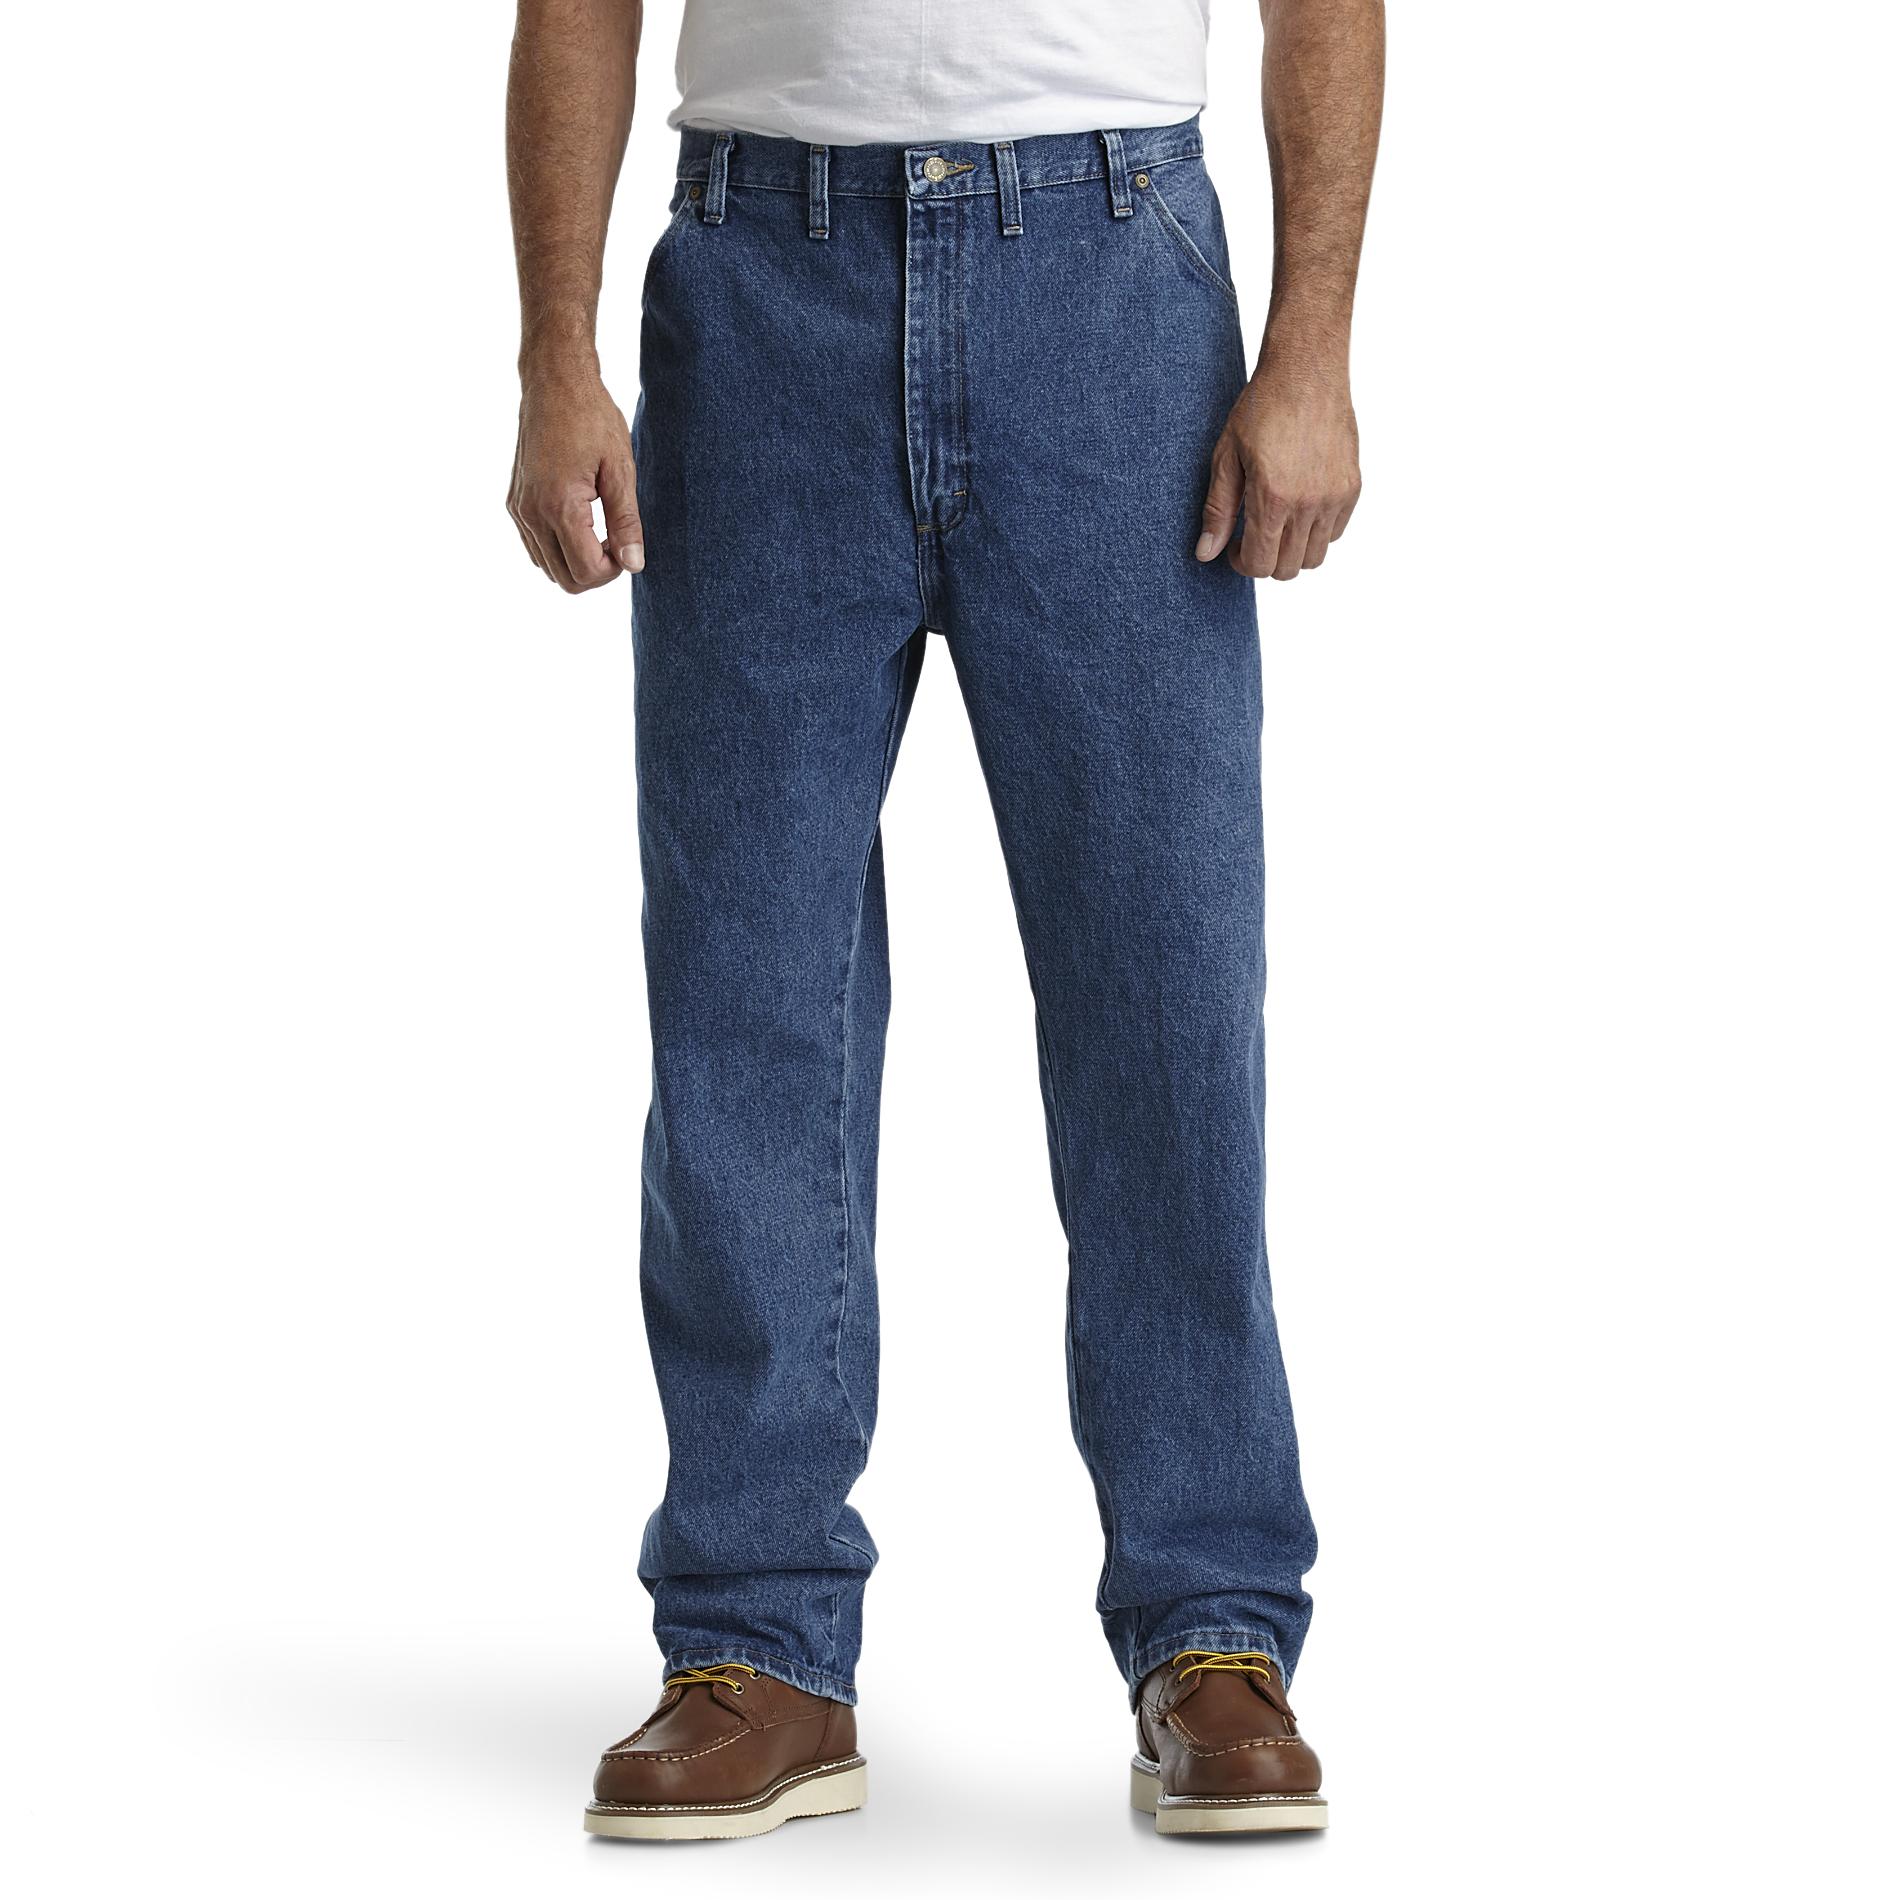 Wrangler Men's Stonewashed Denim Relaxed Fit Jean - Clothing, Shoes ...